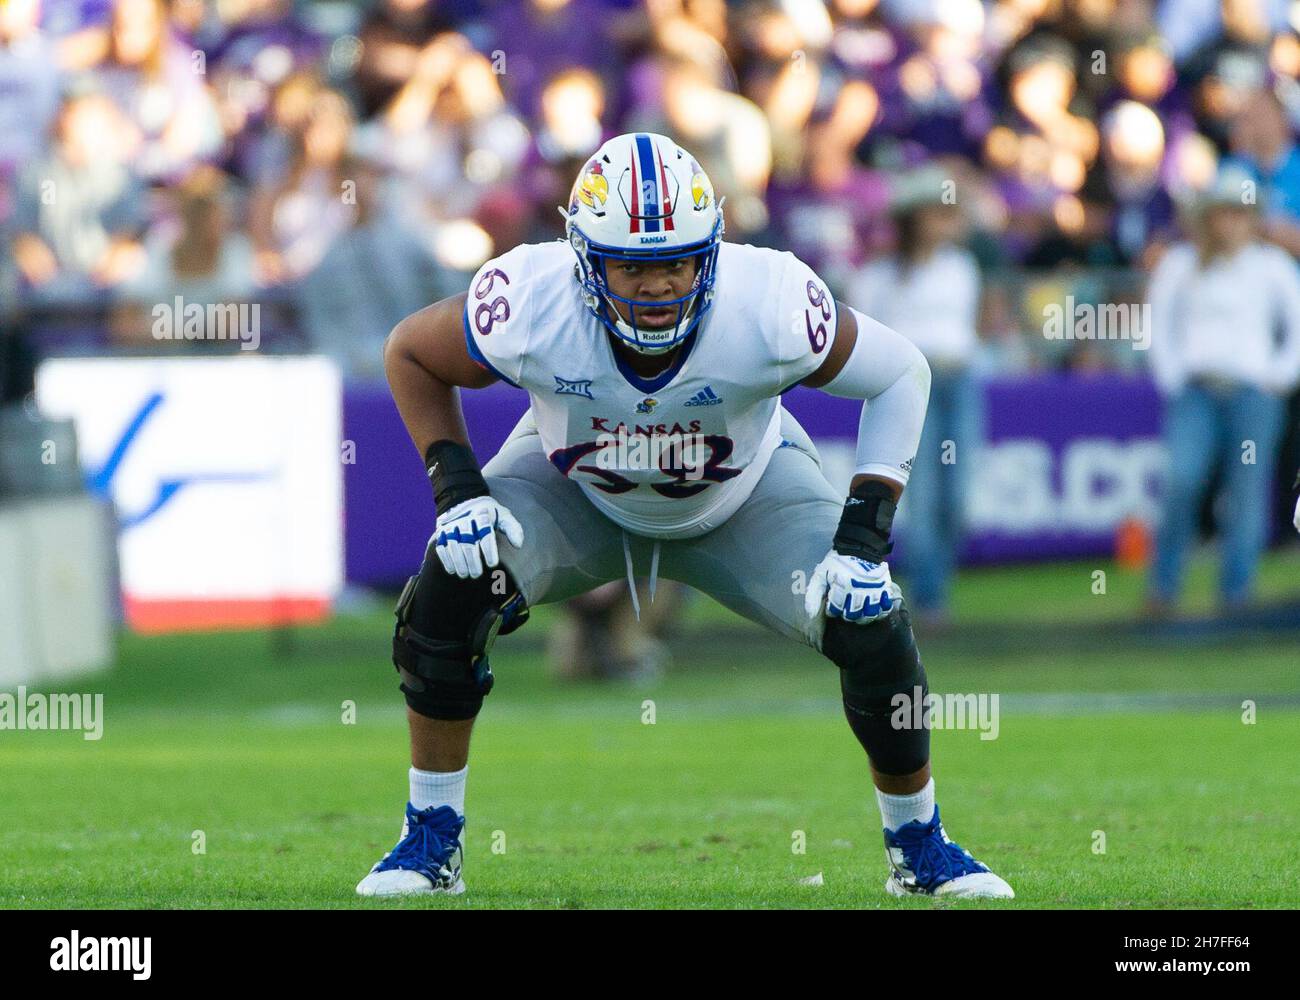 Fort Worth, Texas, USA. 20th Nov, 2021. Kansas Jayhawks offensive lineman Earl Bostick Jr. (68) gets ready for the snap during the 1st half the NCAA Football game between the Kansas Jayhawks and TCU Horned Frogs at Amon G. Carter Stadium in Fort Worth, Texas. Matthew Lynch/CSM/Alamy Live News Stock Photo